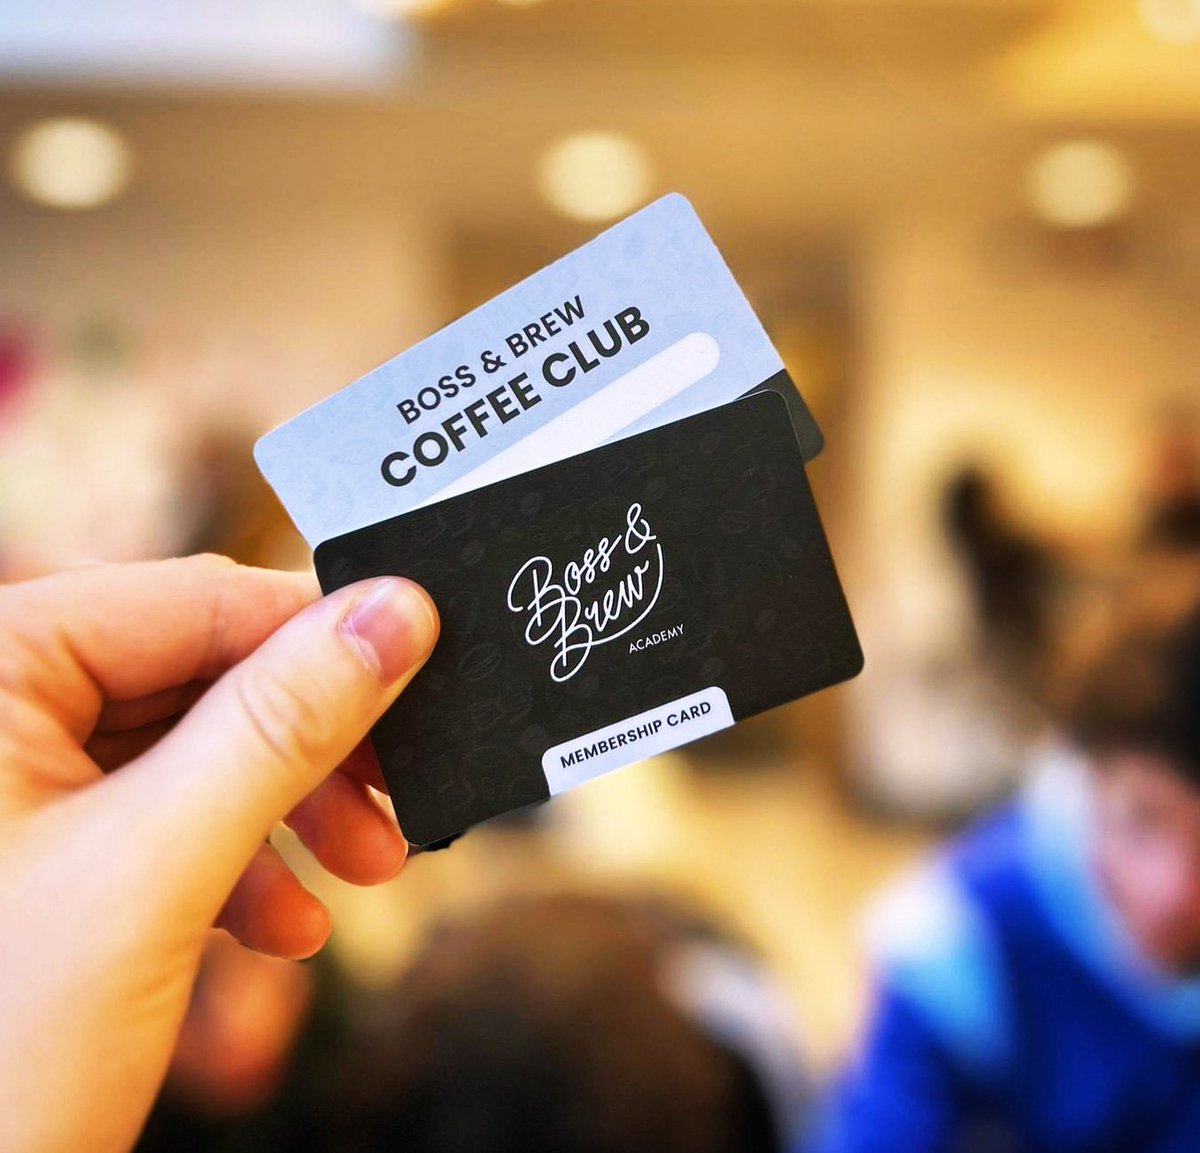 Always got something up my sleeve! 🥳🥳🥳 The launch of our Boss & Brew Coffee Club membership! A card giving our barista grads exclusive discounts & offers at some of Cardiff's best indie coffee shops 😍 bridging the gap between our grads and the speciality coffee sector 🤩